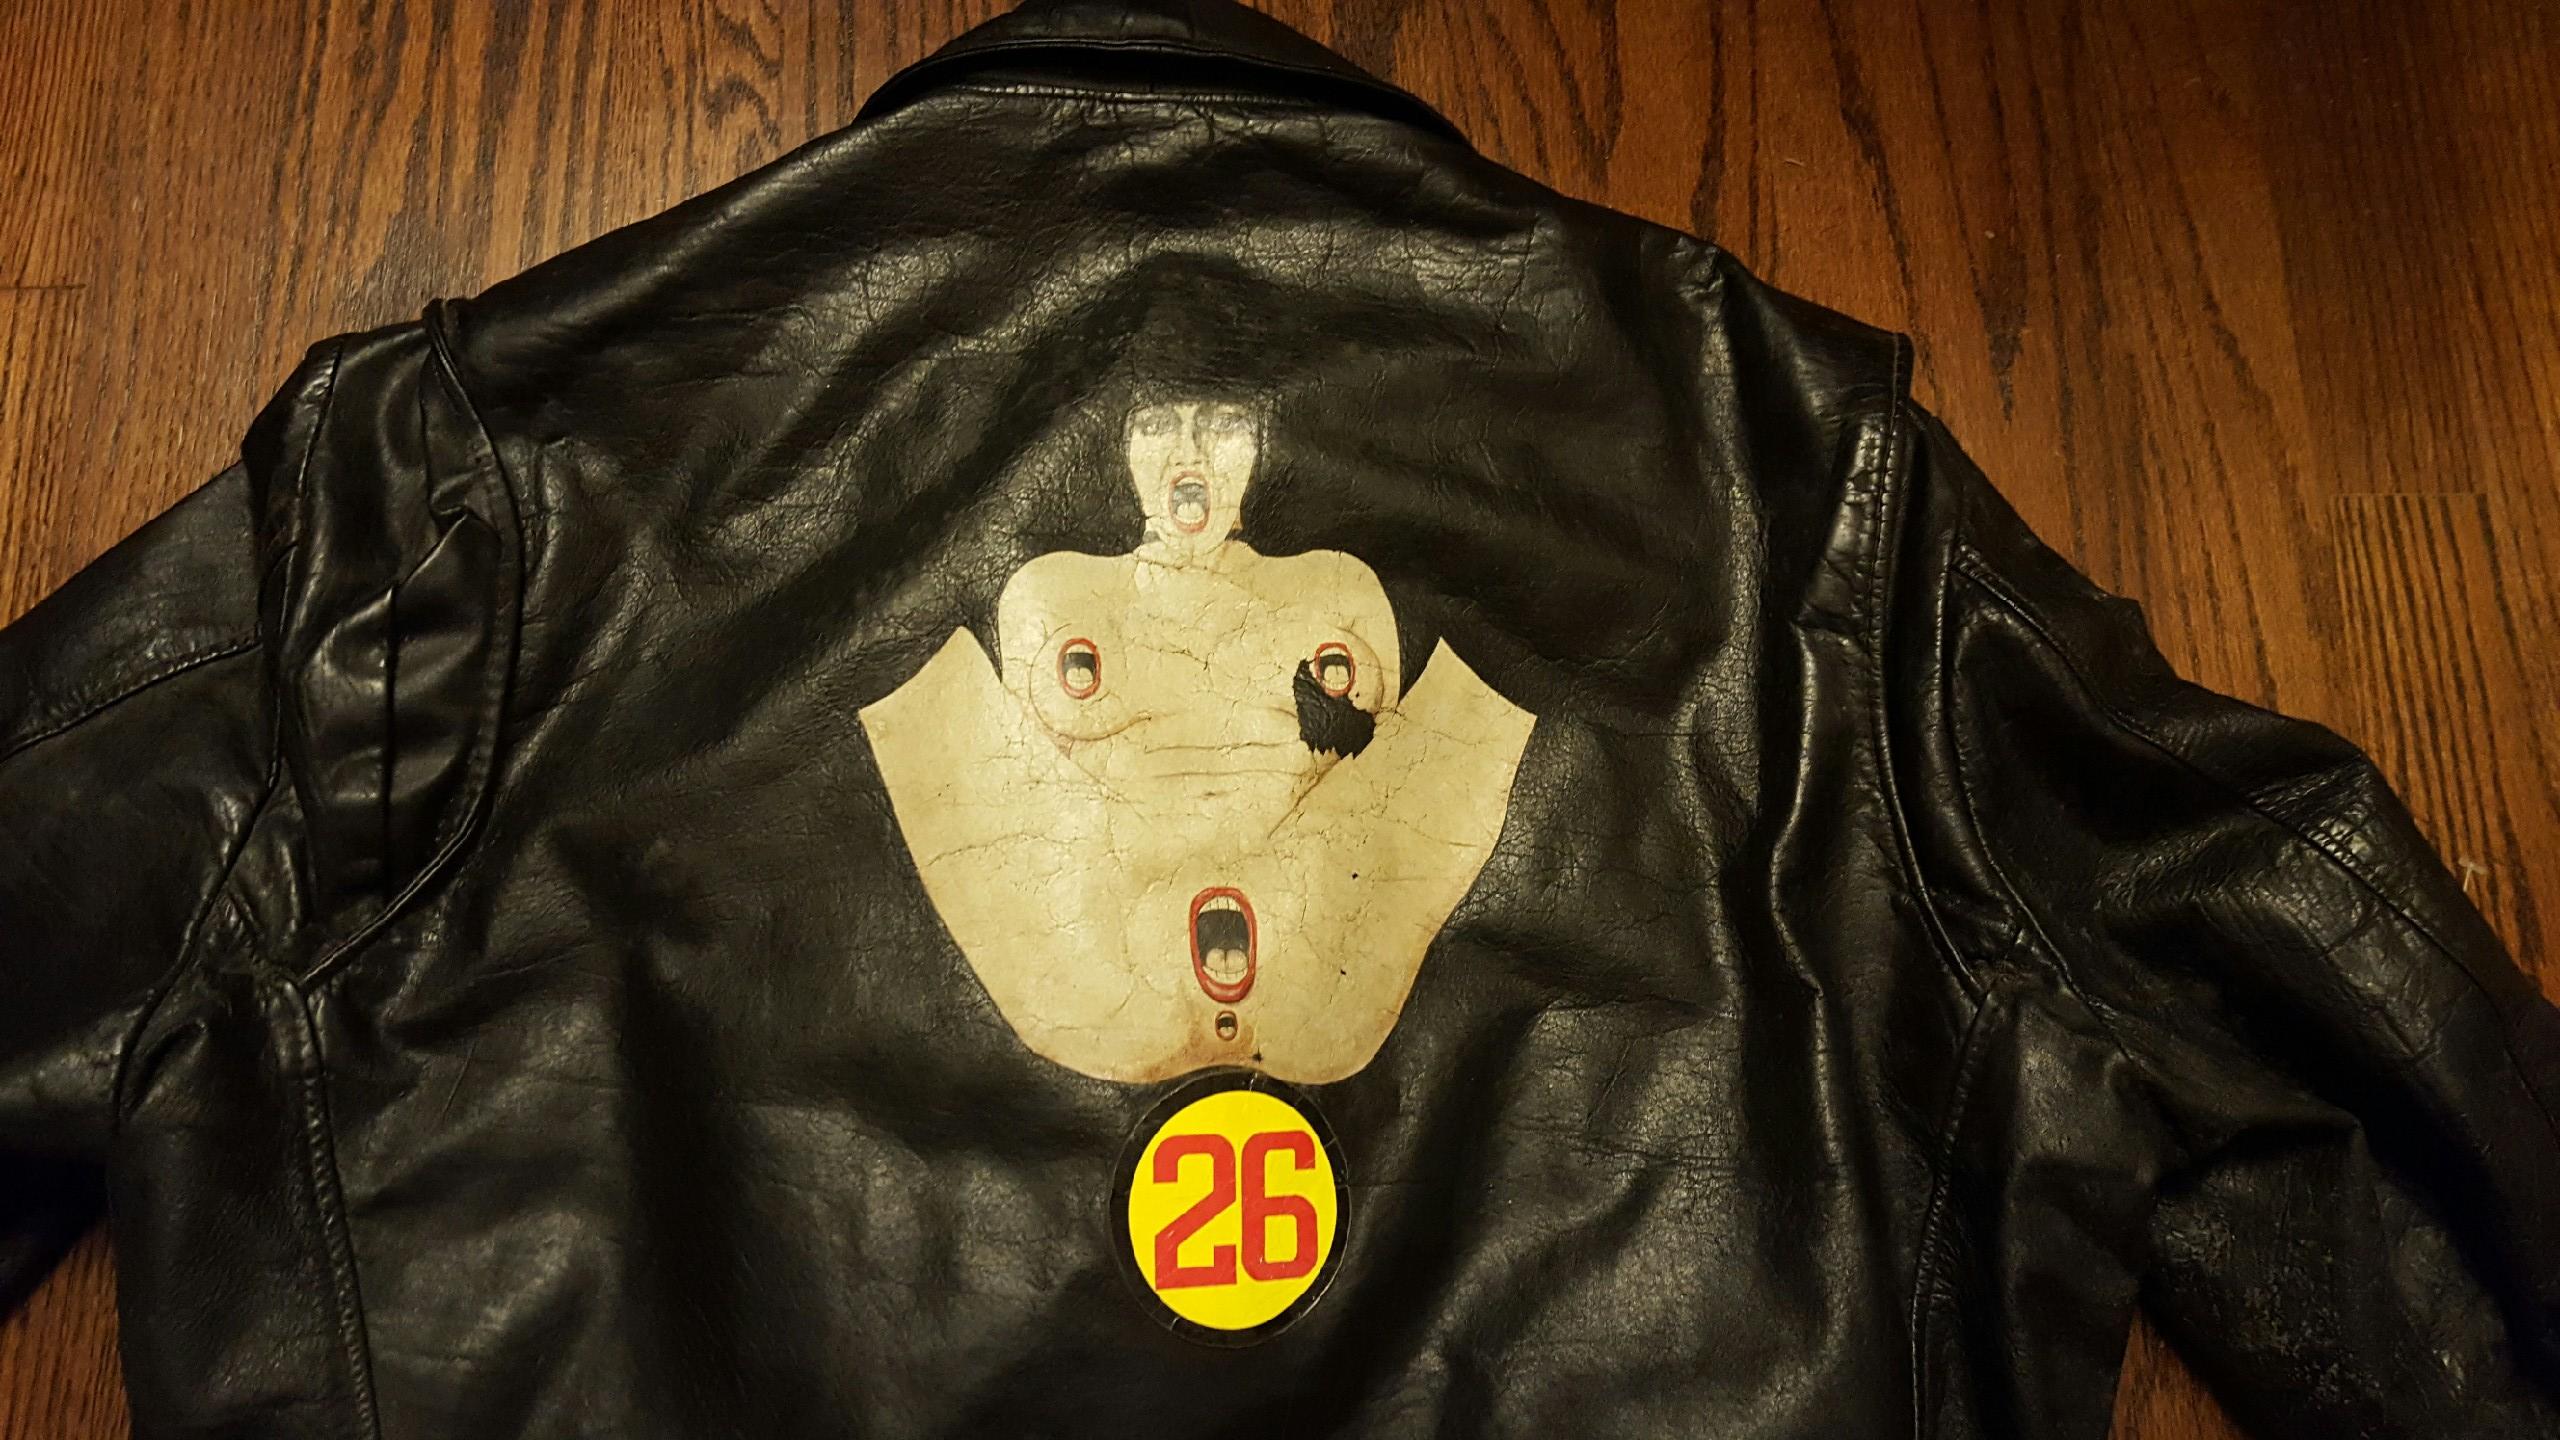 Layne's Leather Jacket Is This Really His Or His Artwork - Layne Staley Leather Jacket , HD Wallpaper & Backgrounds